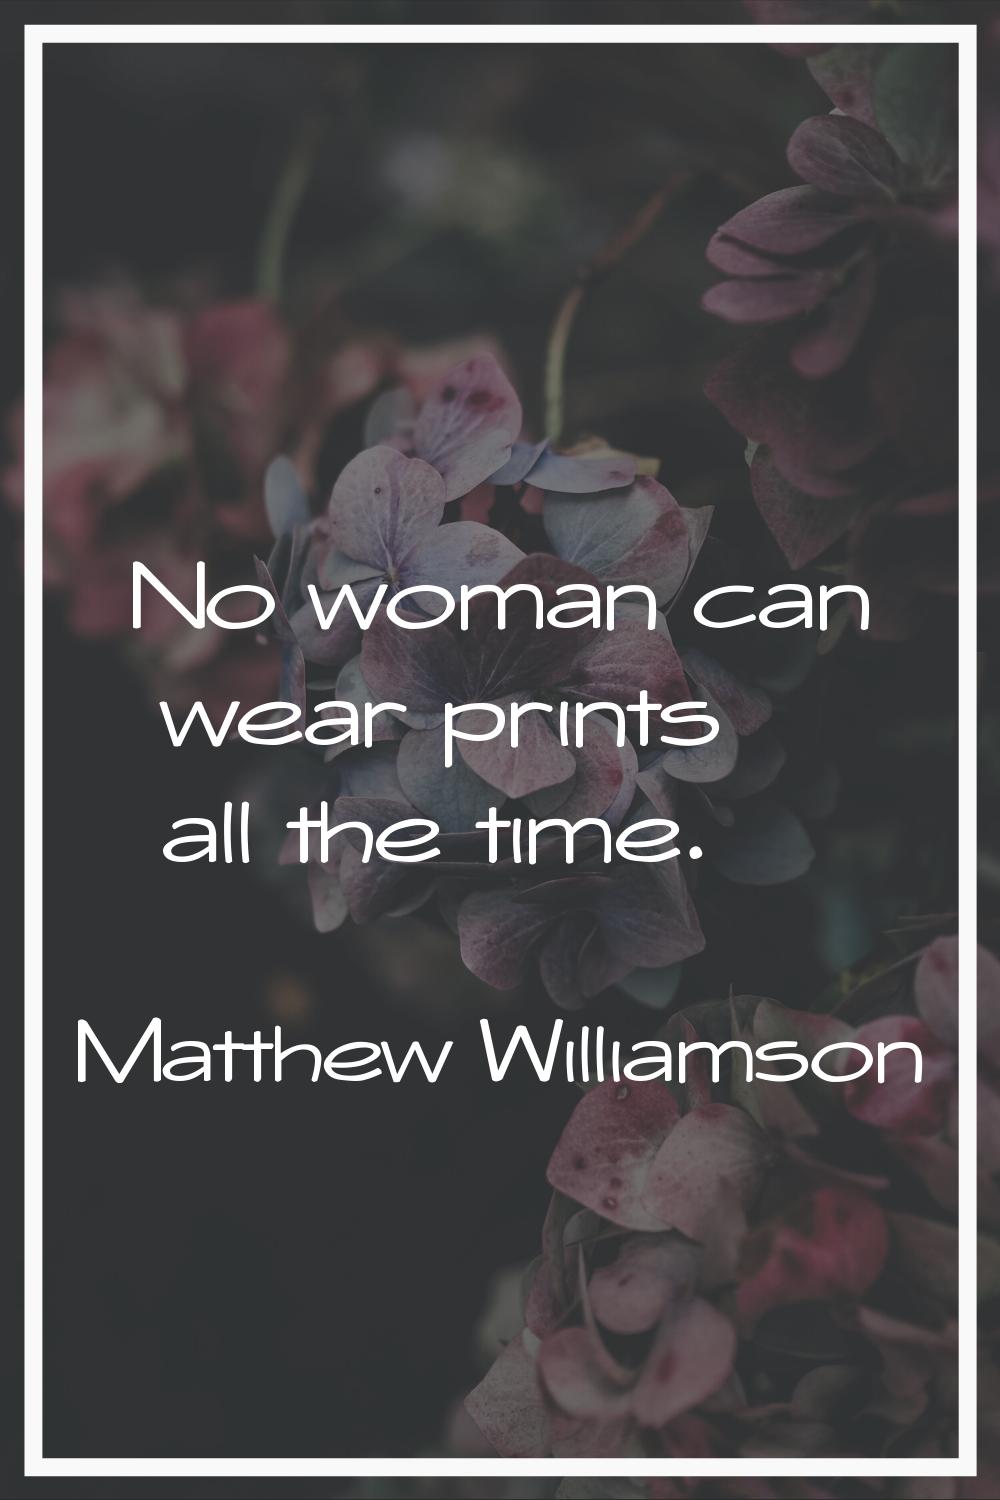 No woman can wear prints all the time.